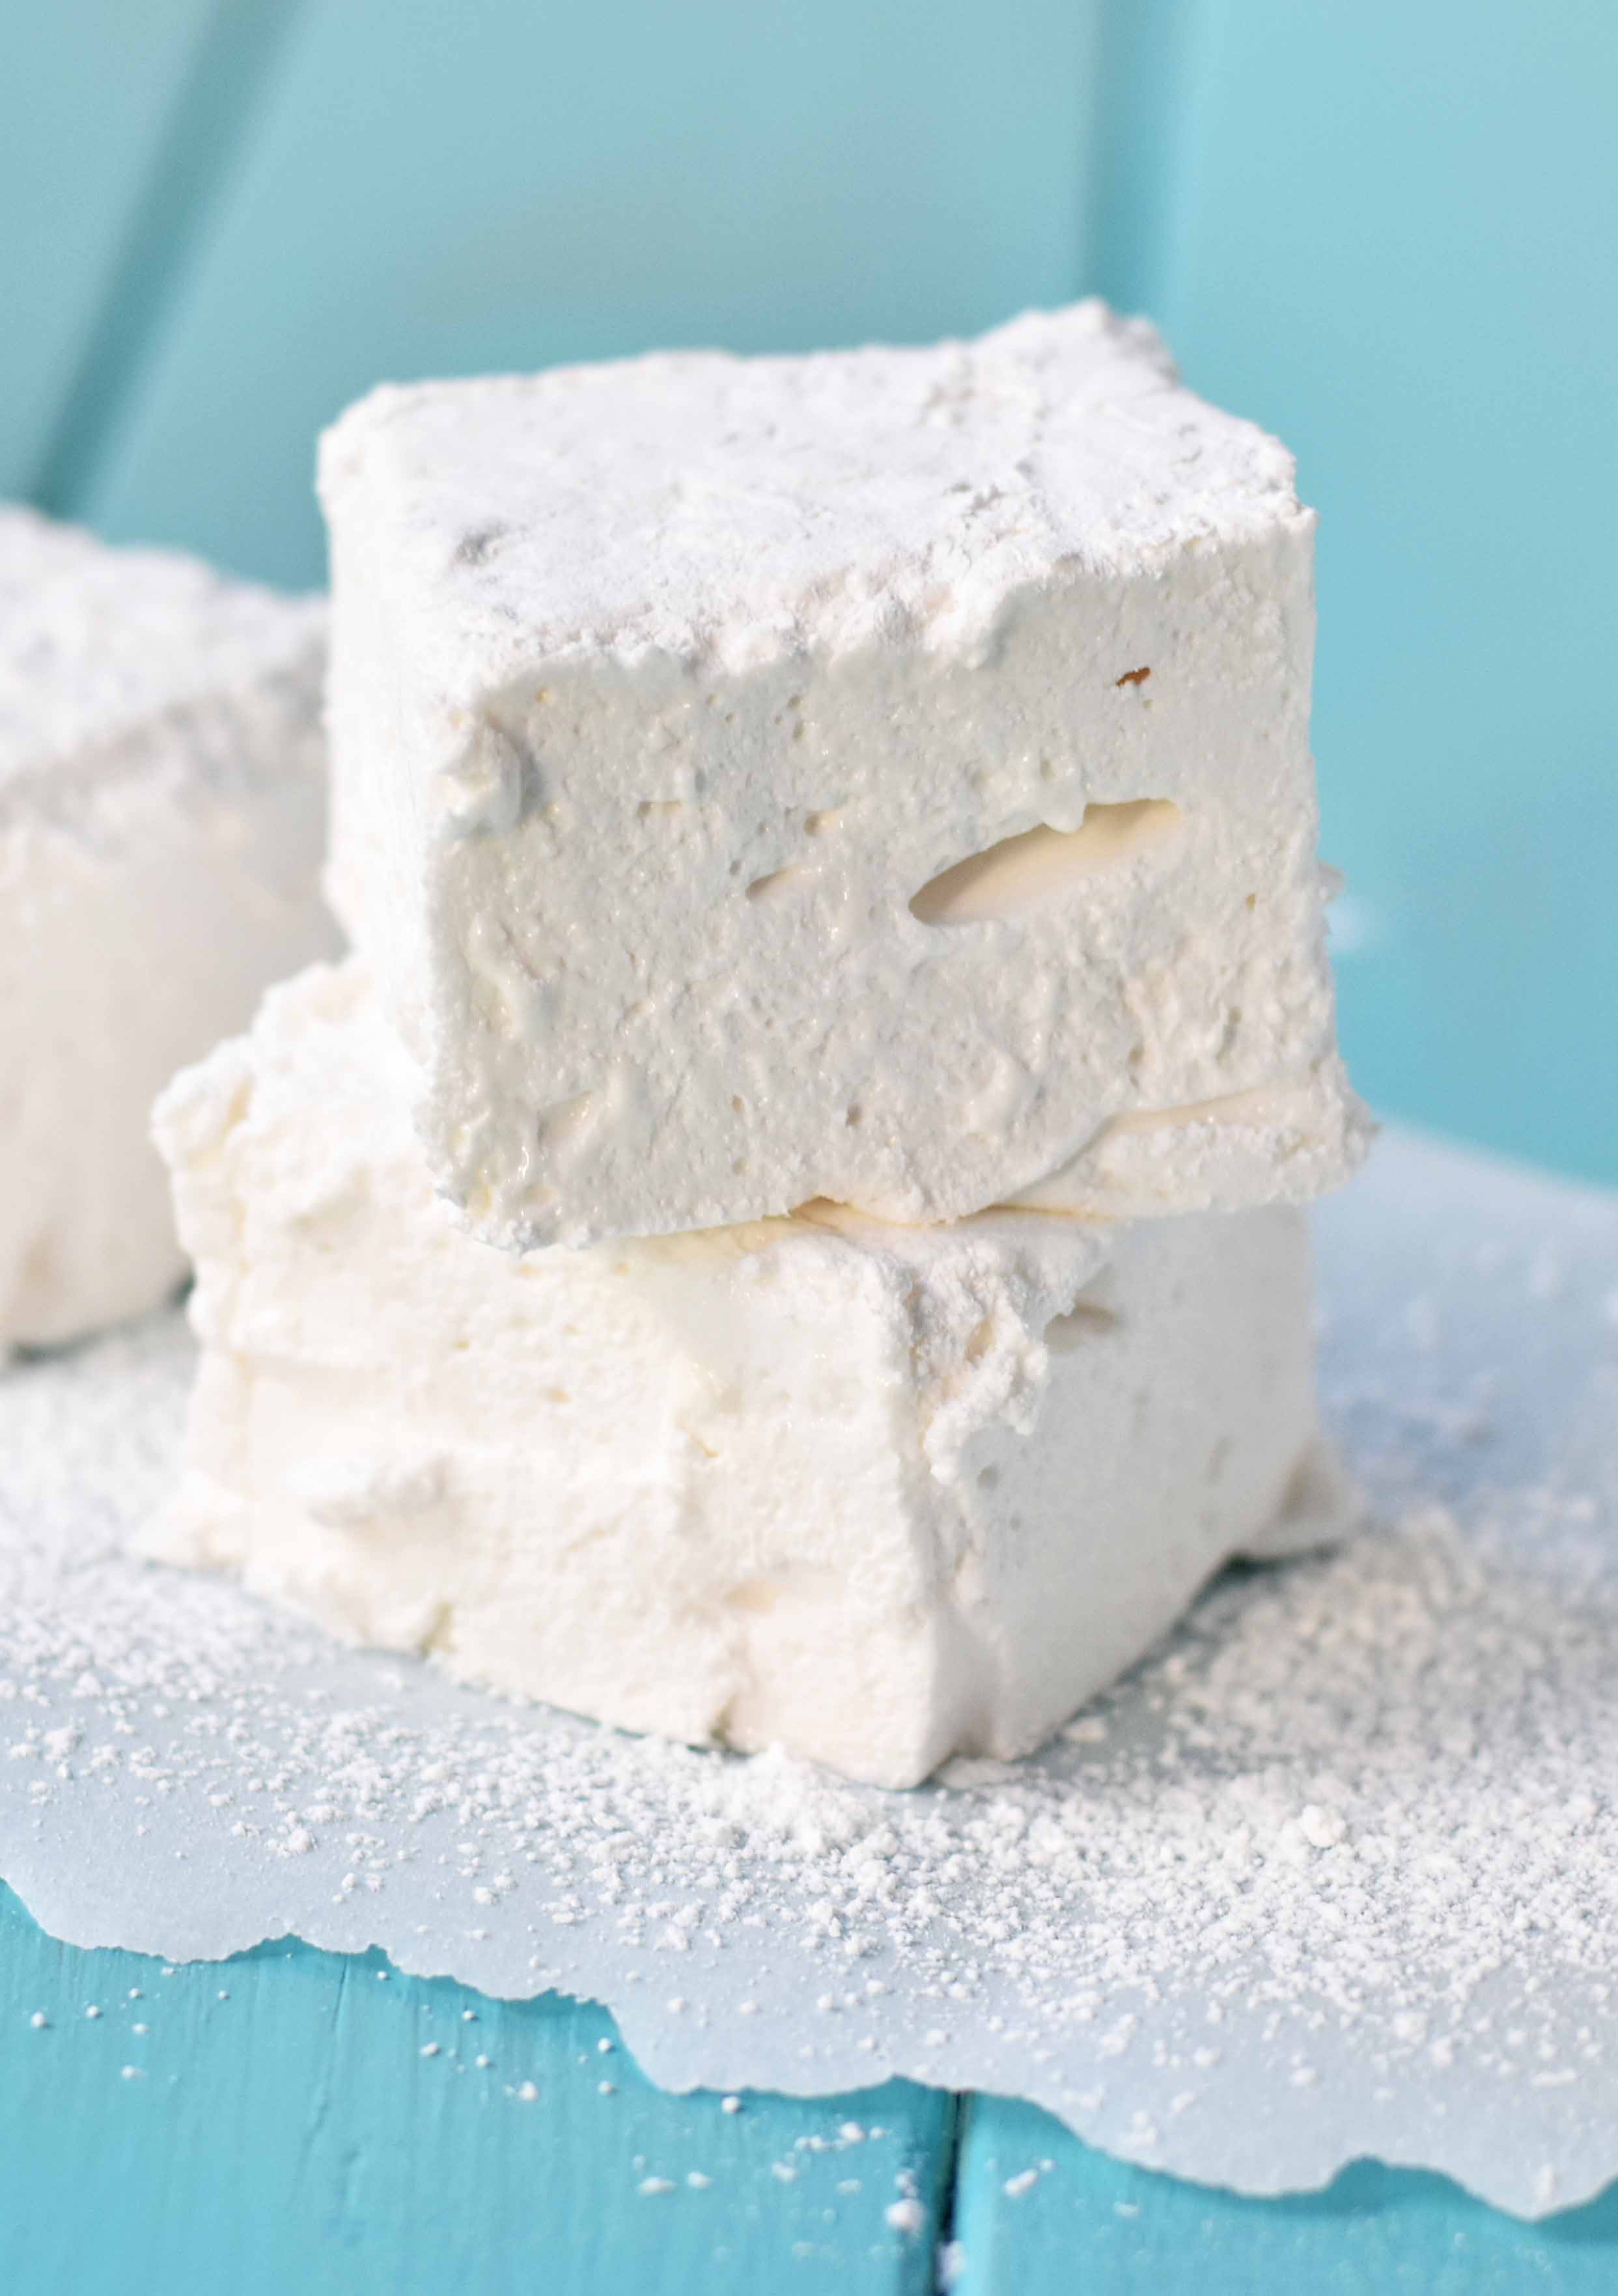 How to make soft and homemade marshmallows. Simple recipe to make perfect marshmallows at home. www.modernhoney.com